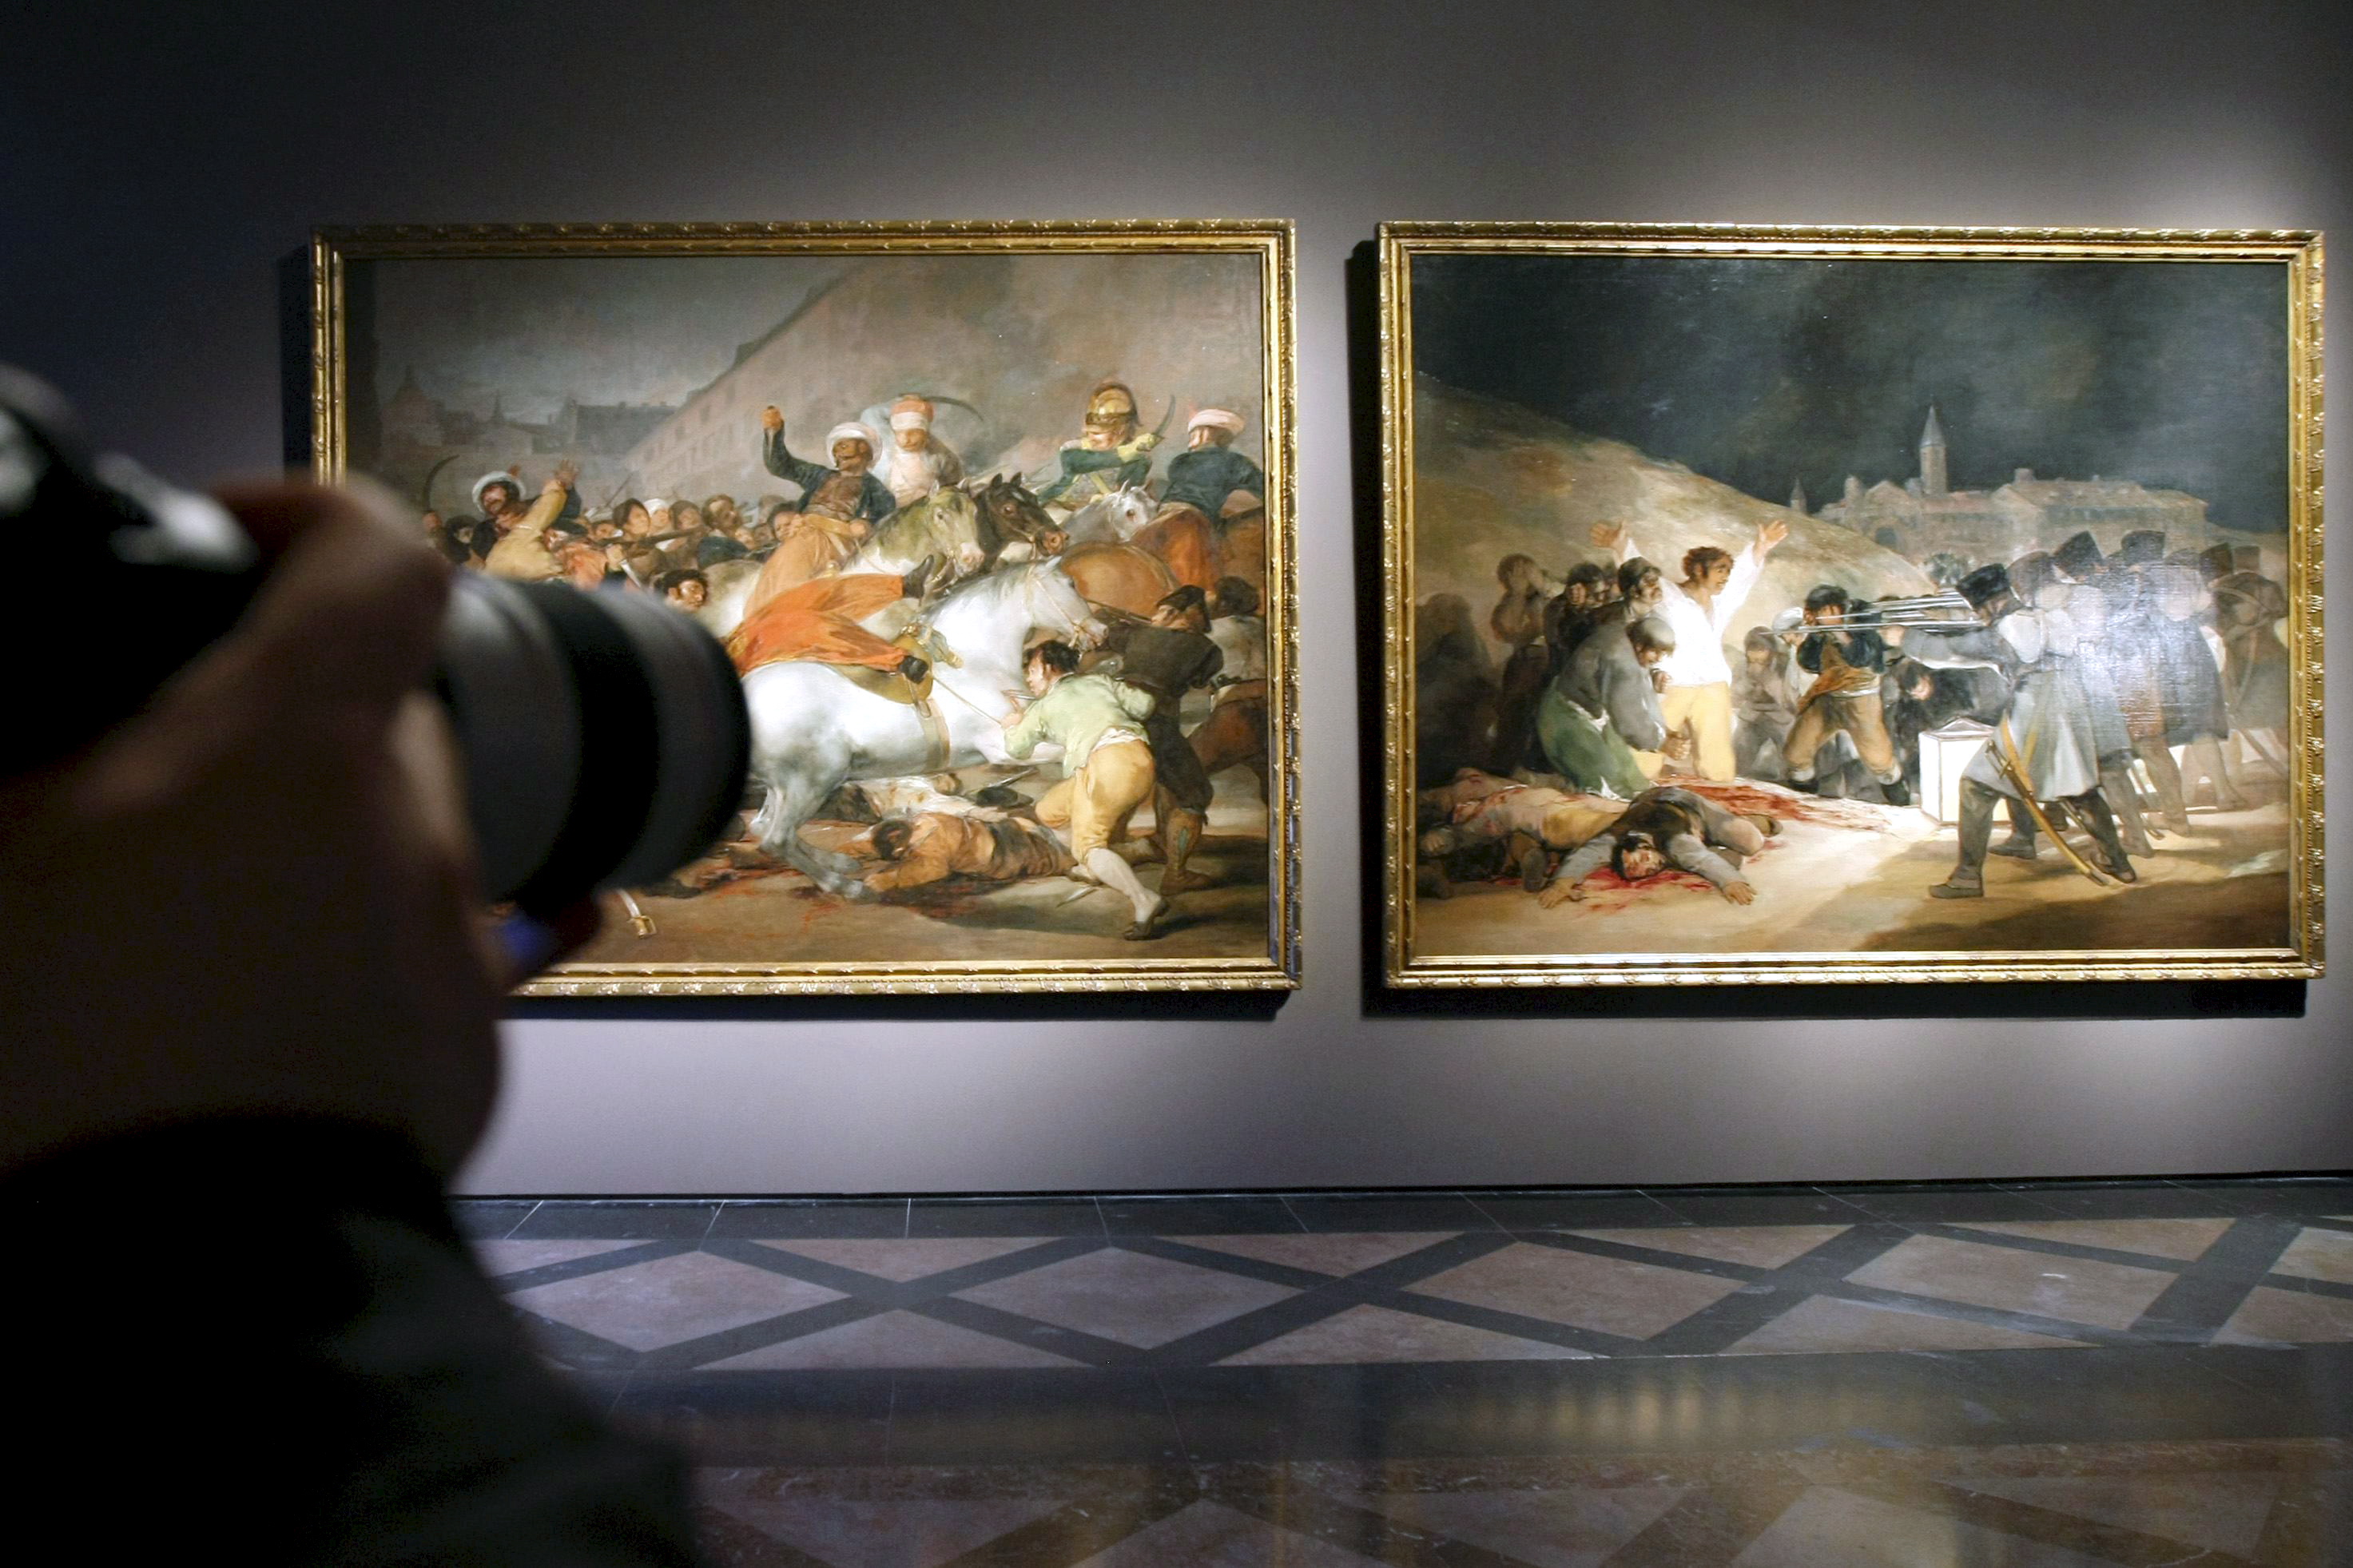 epa01308951 A man takes photos of (R-L) Goya's paintings 'Los Fusilamientos del tres de mayo' (The Third of May 1808: The Execution of the Defenders of Madrid) and 'El dos de mayo de 1808' (The second of May 1808), alsow known as 'La carga de los mamelucos' (The Charge of the Mamelukes), after their restoration, at the Prado Museum in Madrid, Spain, 09 April 2008. The paintings were placed in the new hall named 'Goya in times of war', which will be inaugurated 14 April 2008. EPA/FERNANDO ALVARADO